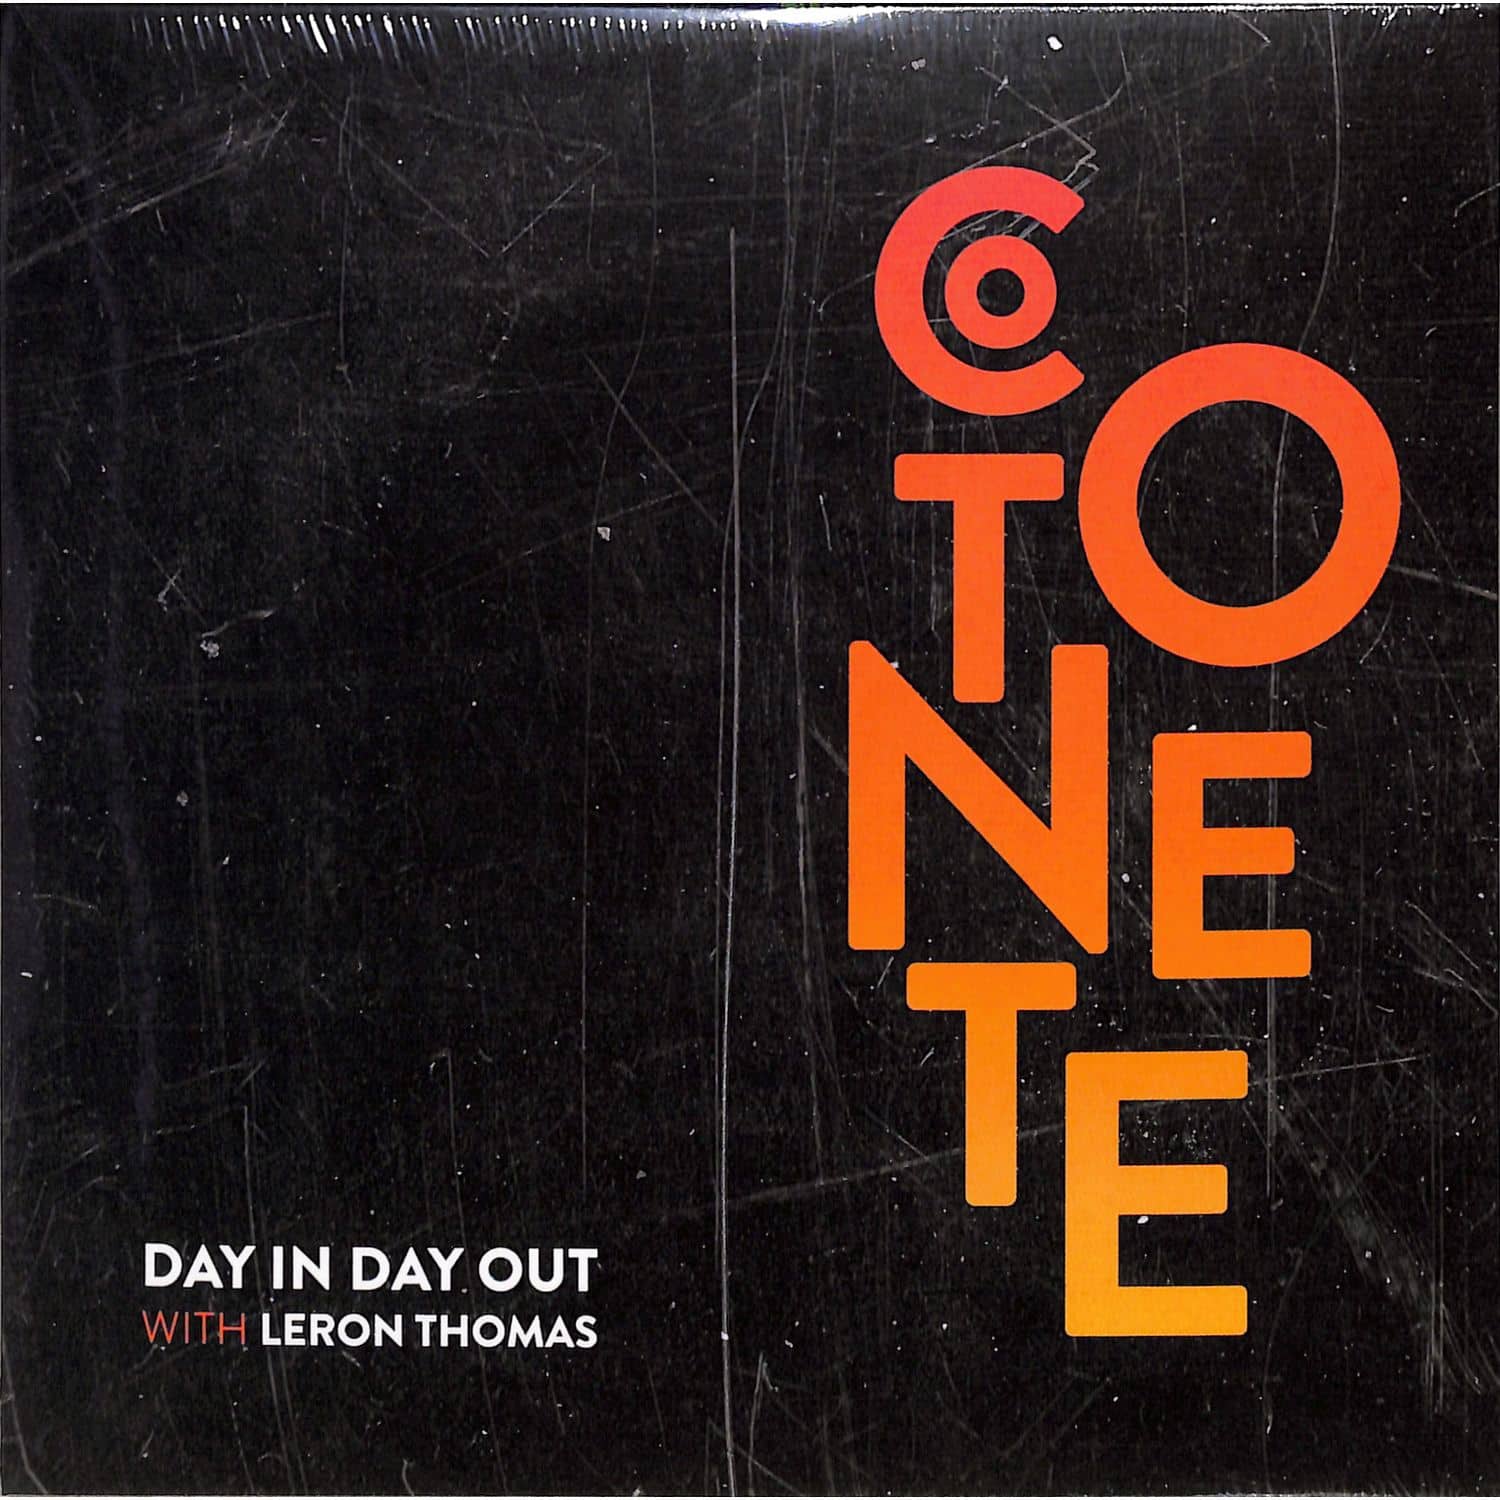 Cotonete - DAY IN DAY OUT 